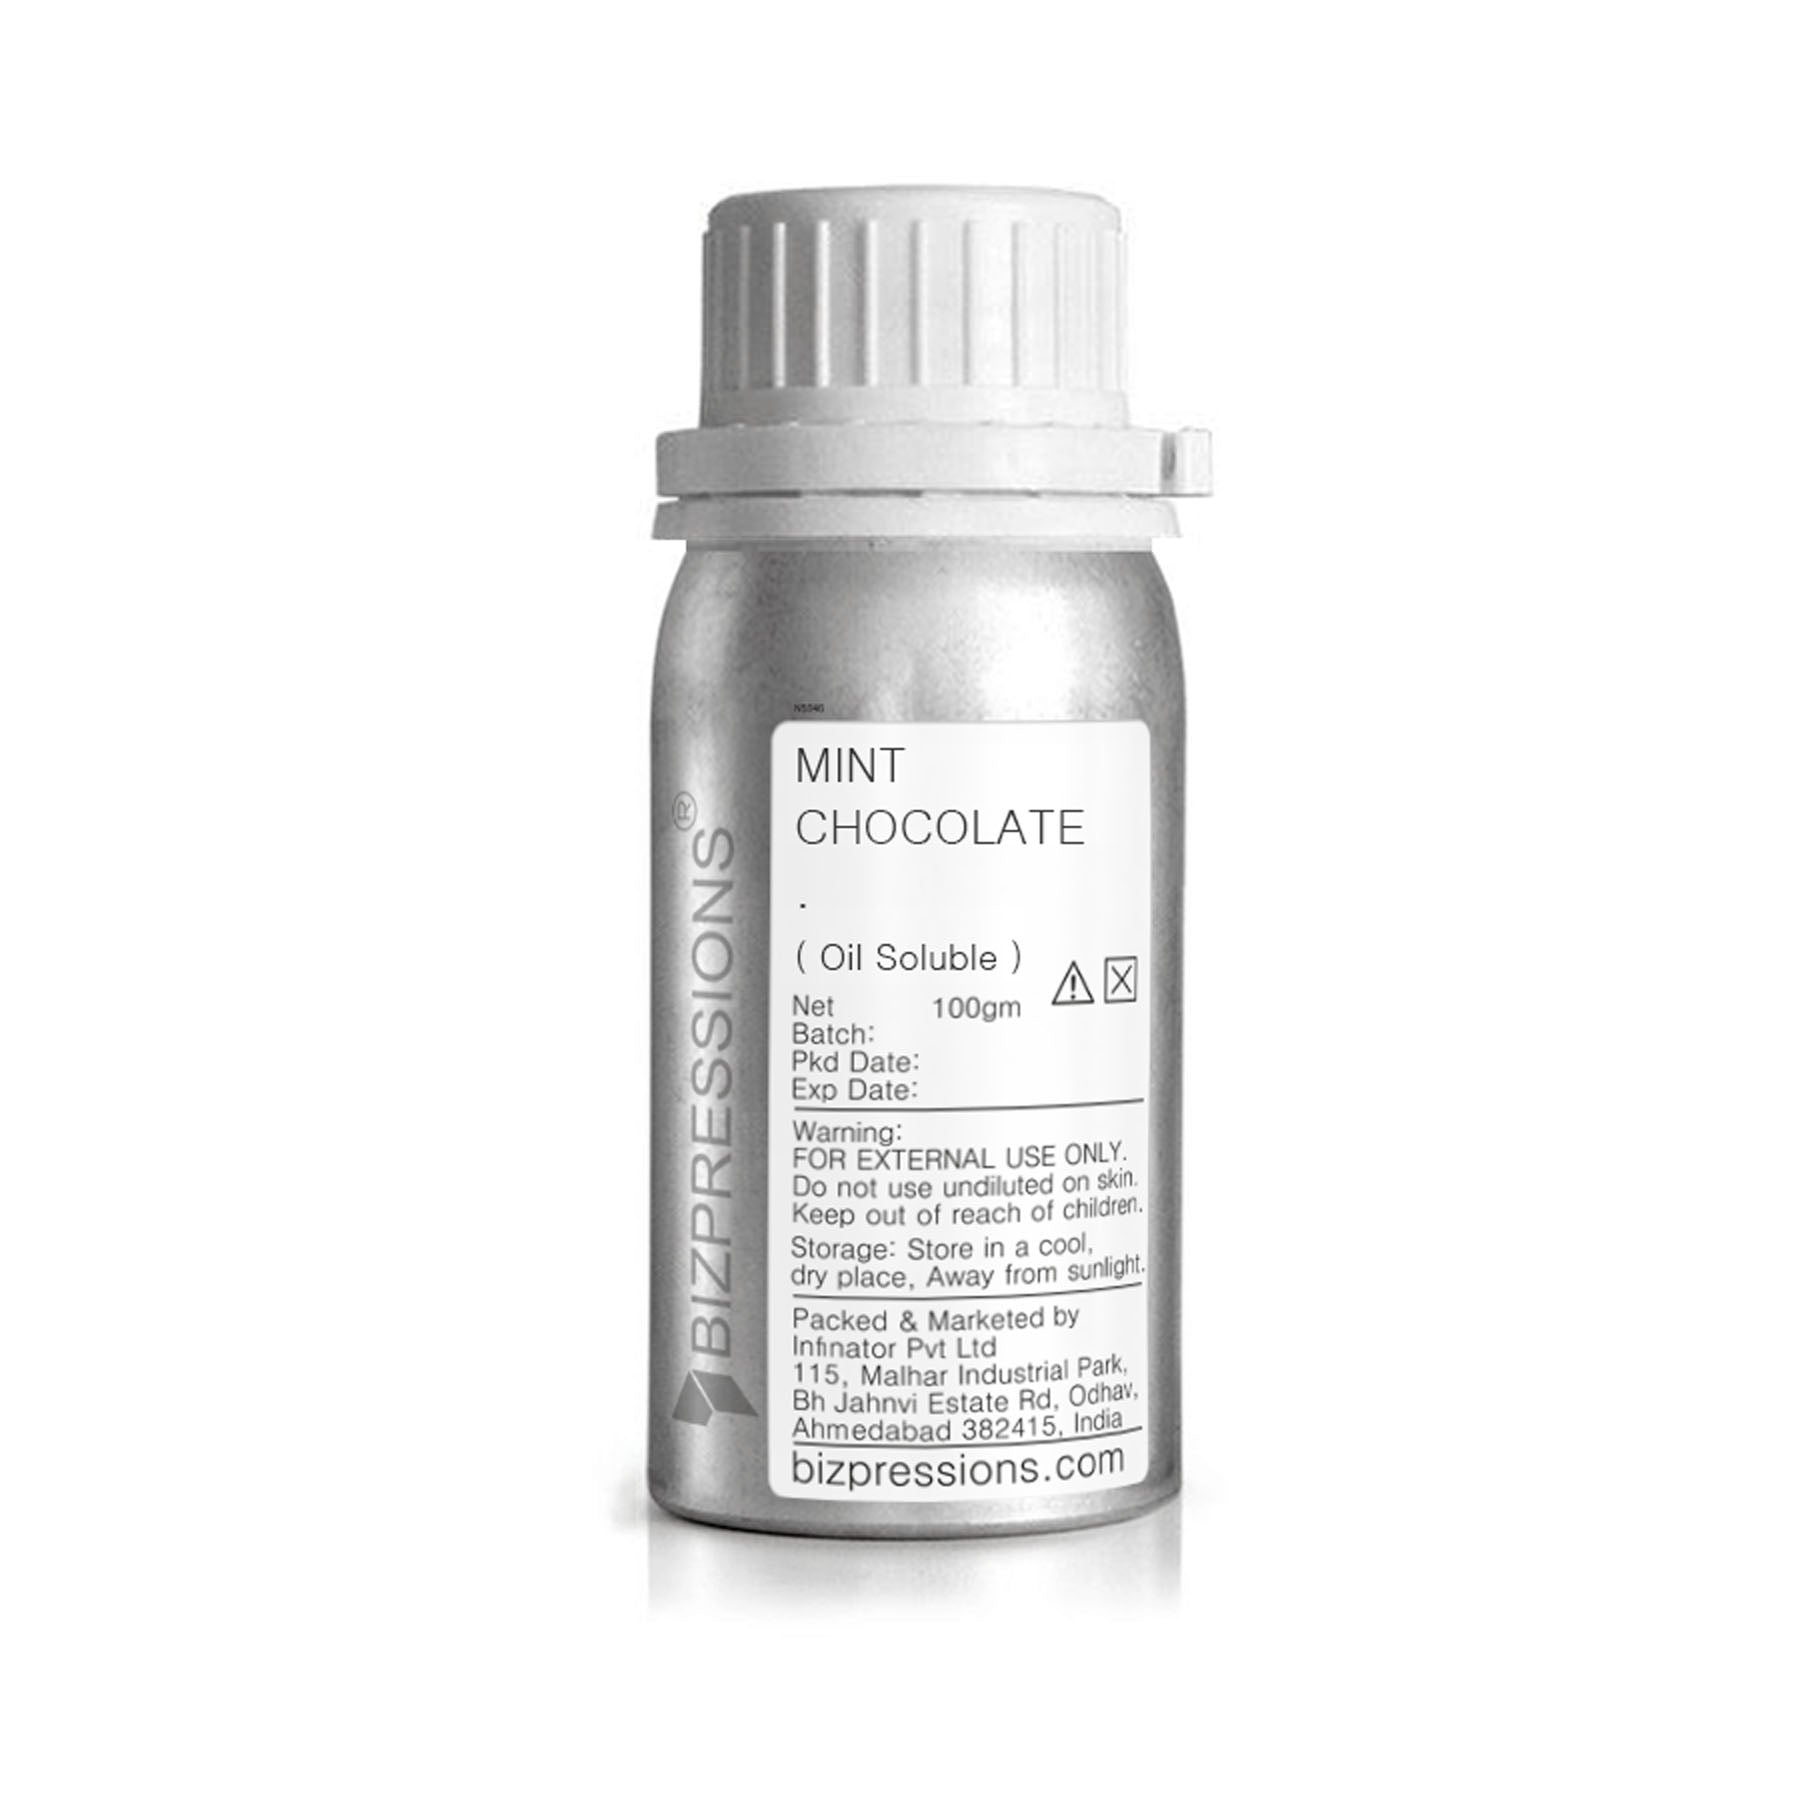 MINT CHOCOLATE - Fragrance ( Oil Soluble ) - 100 gm